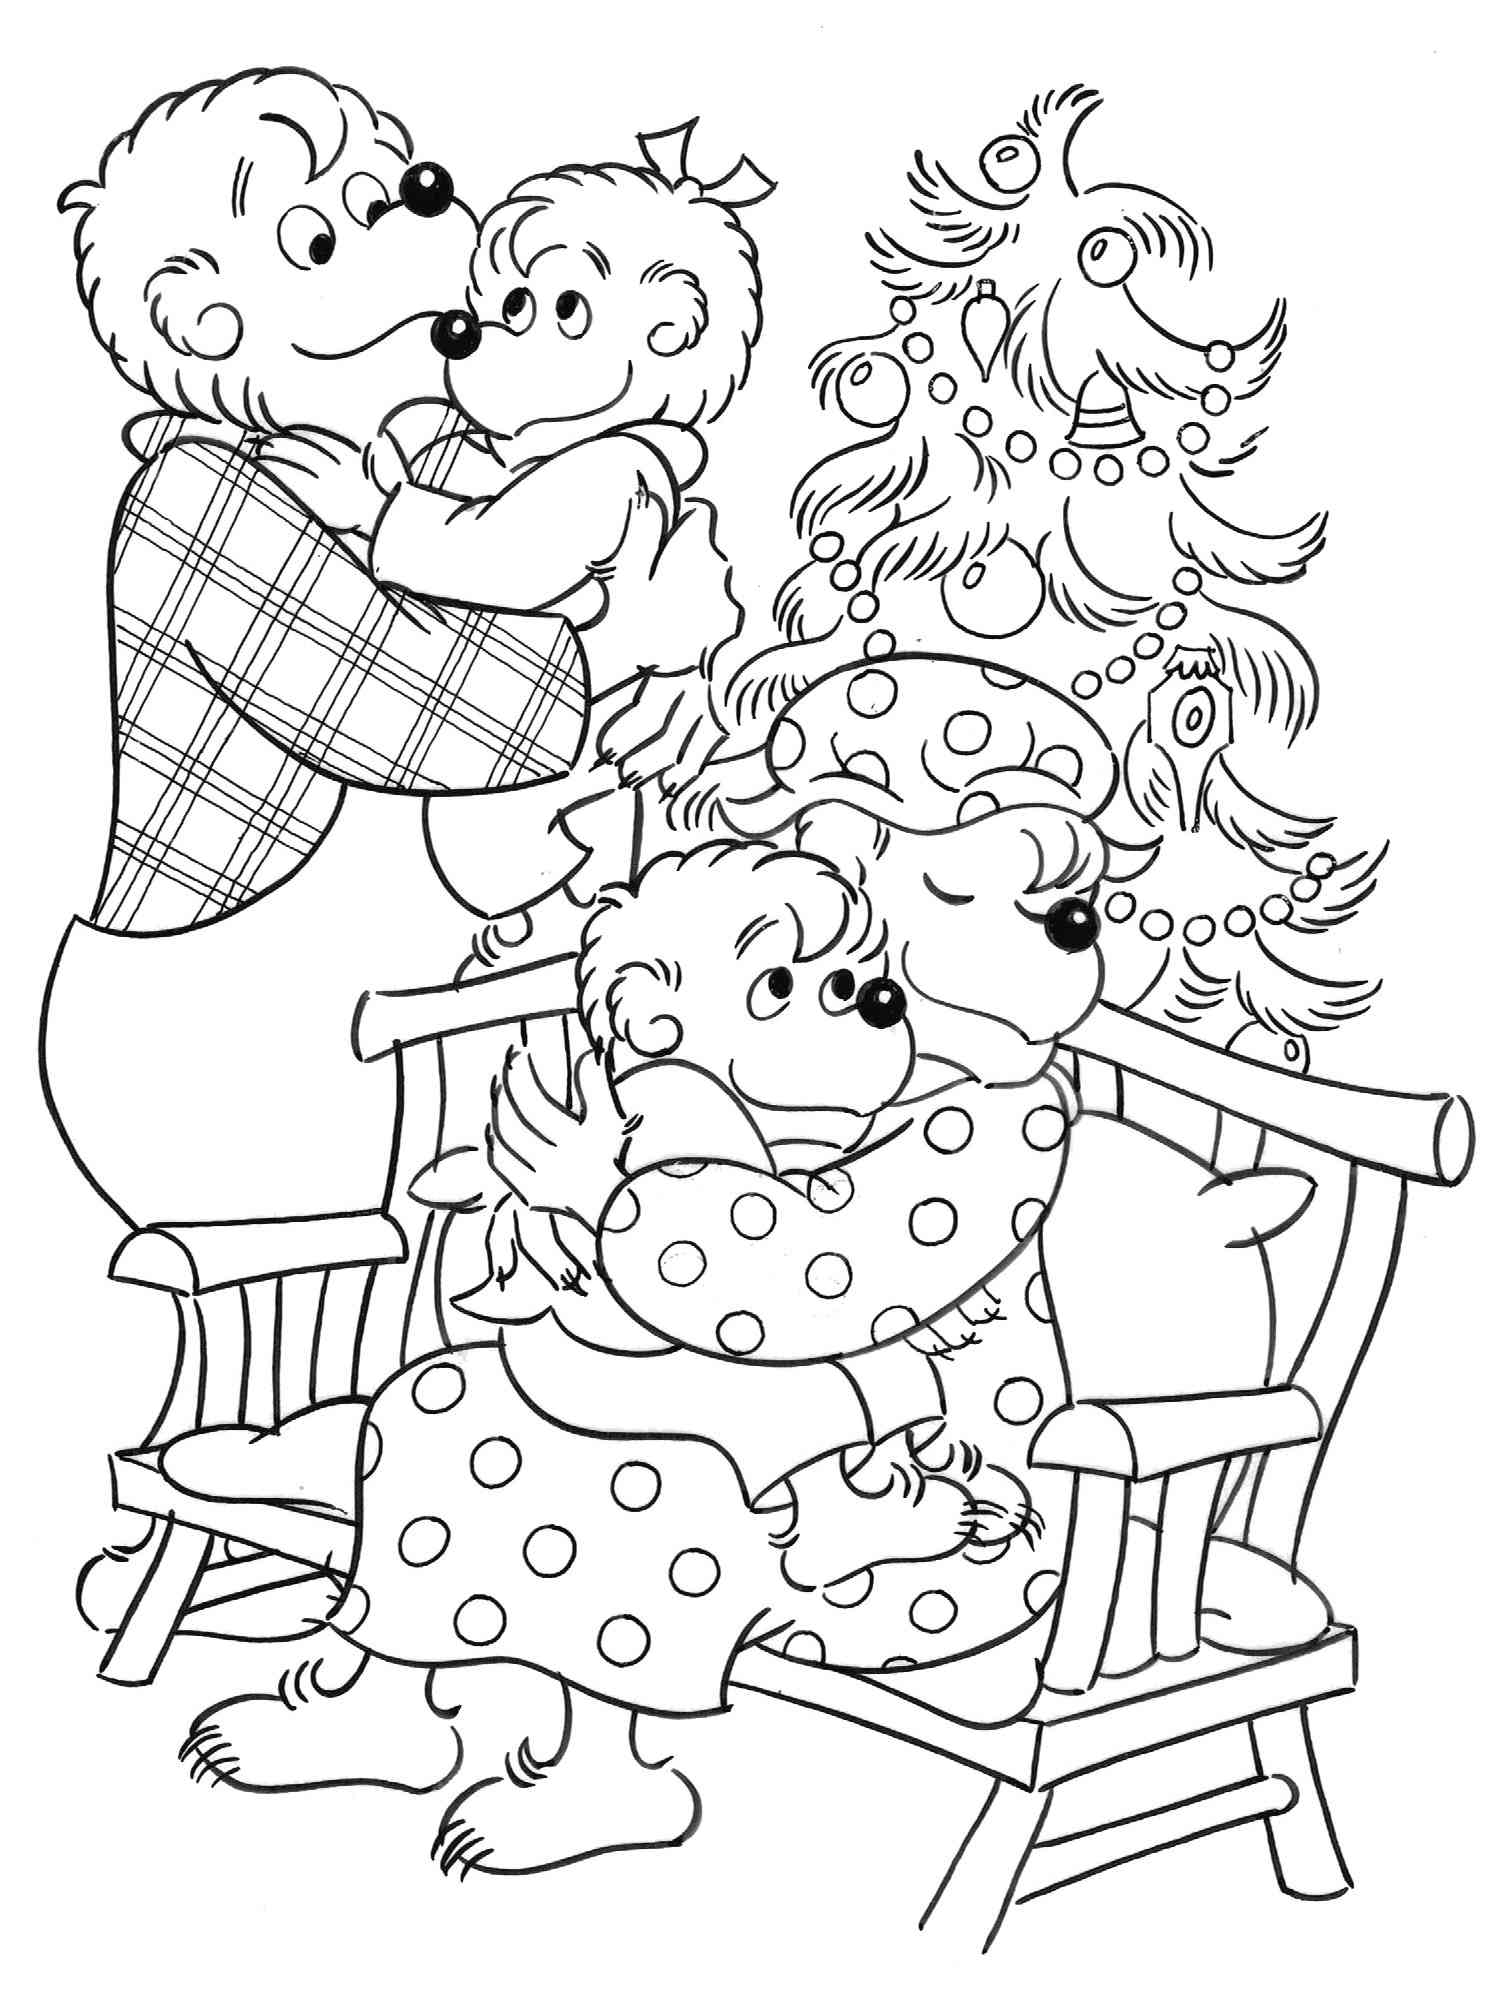 Berenstain Bears 13 coloring page